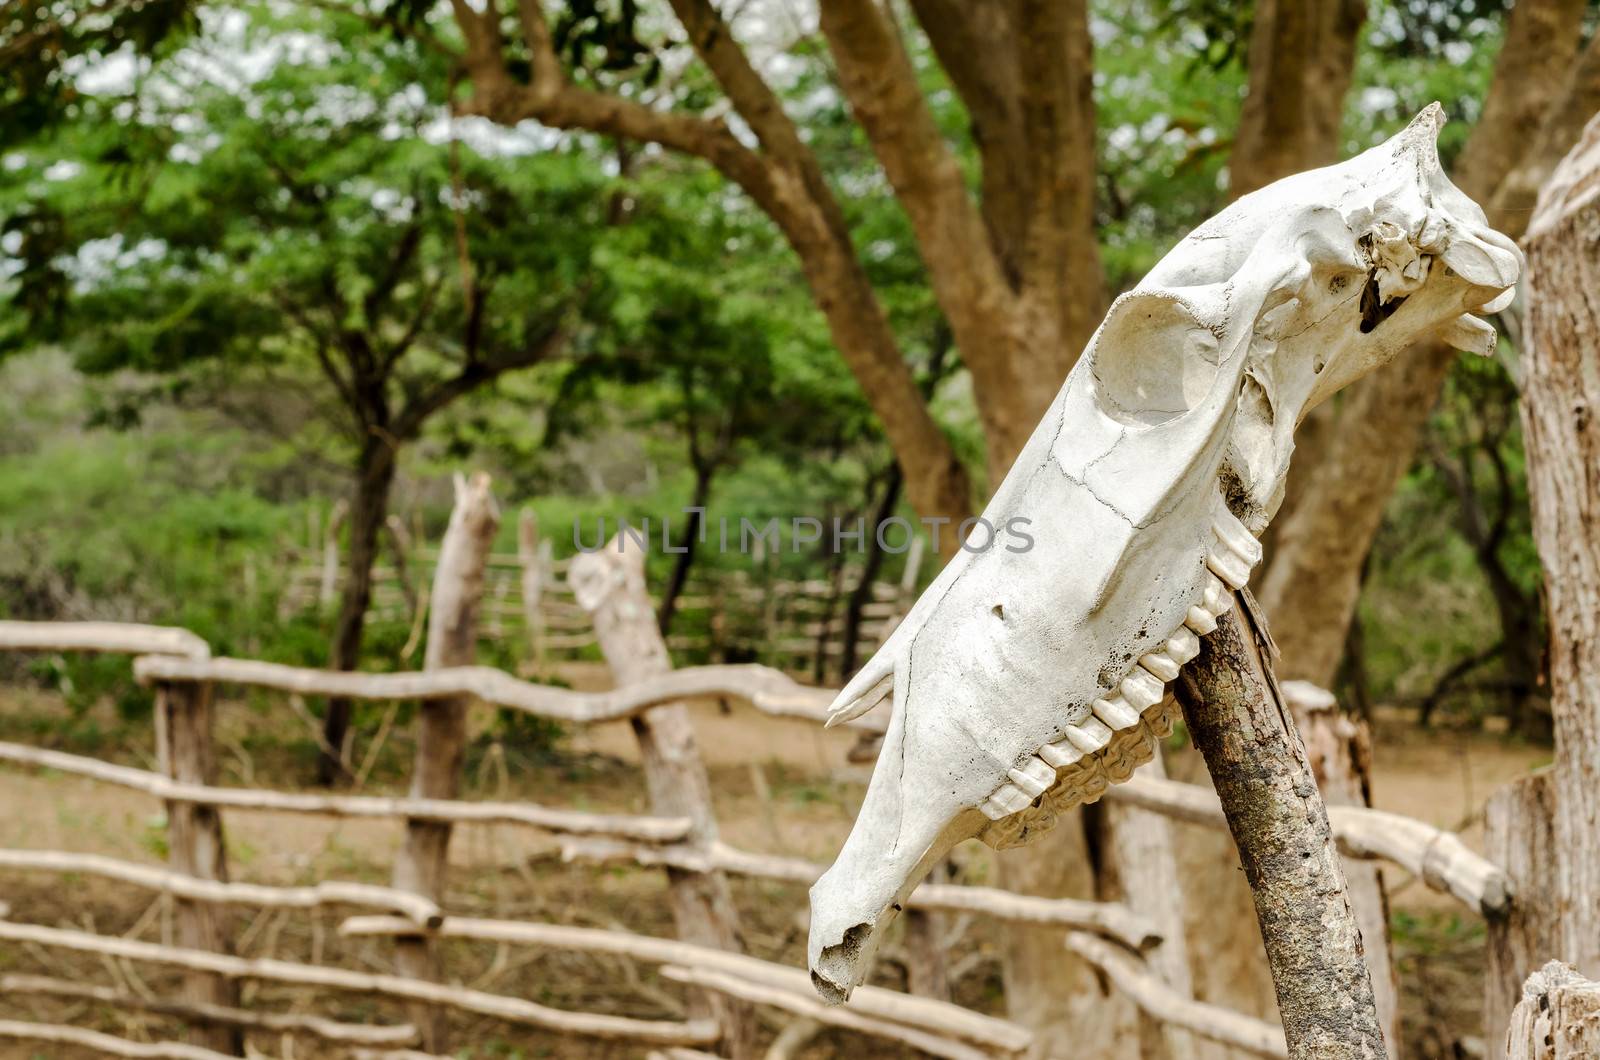 Cow Skull on a Fence by jkraft5